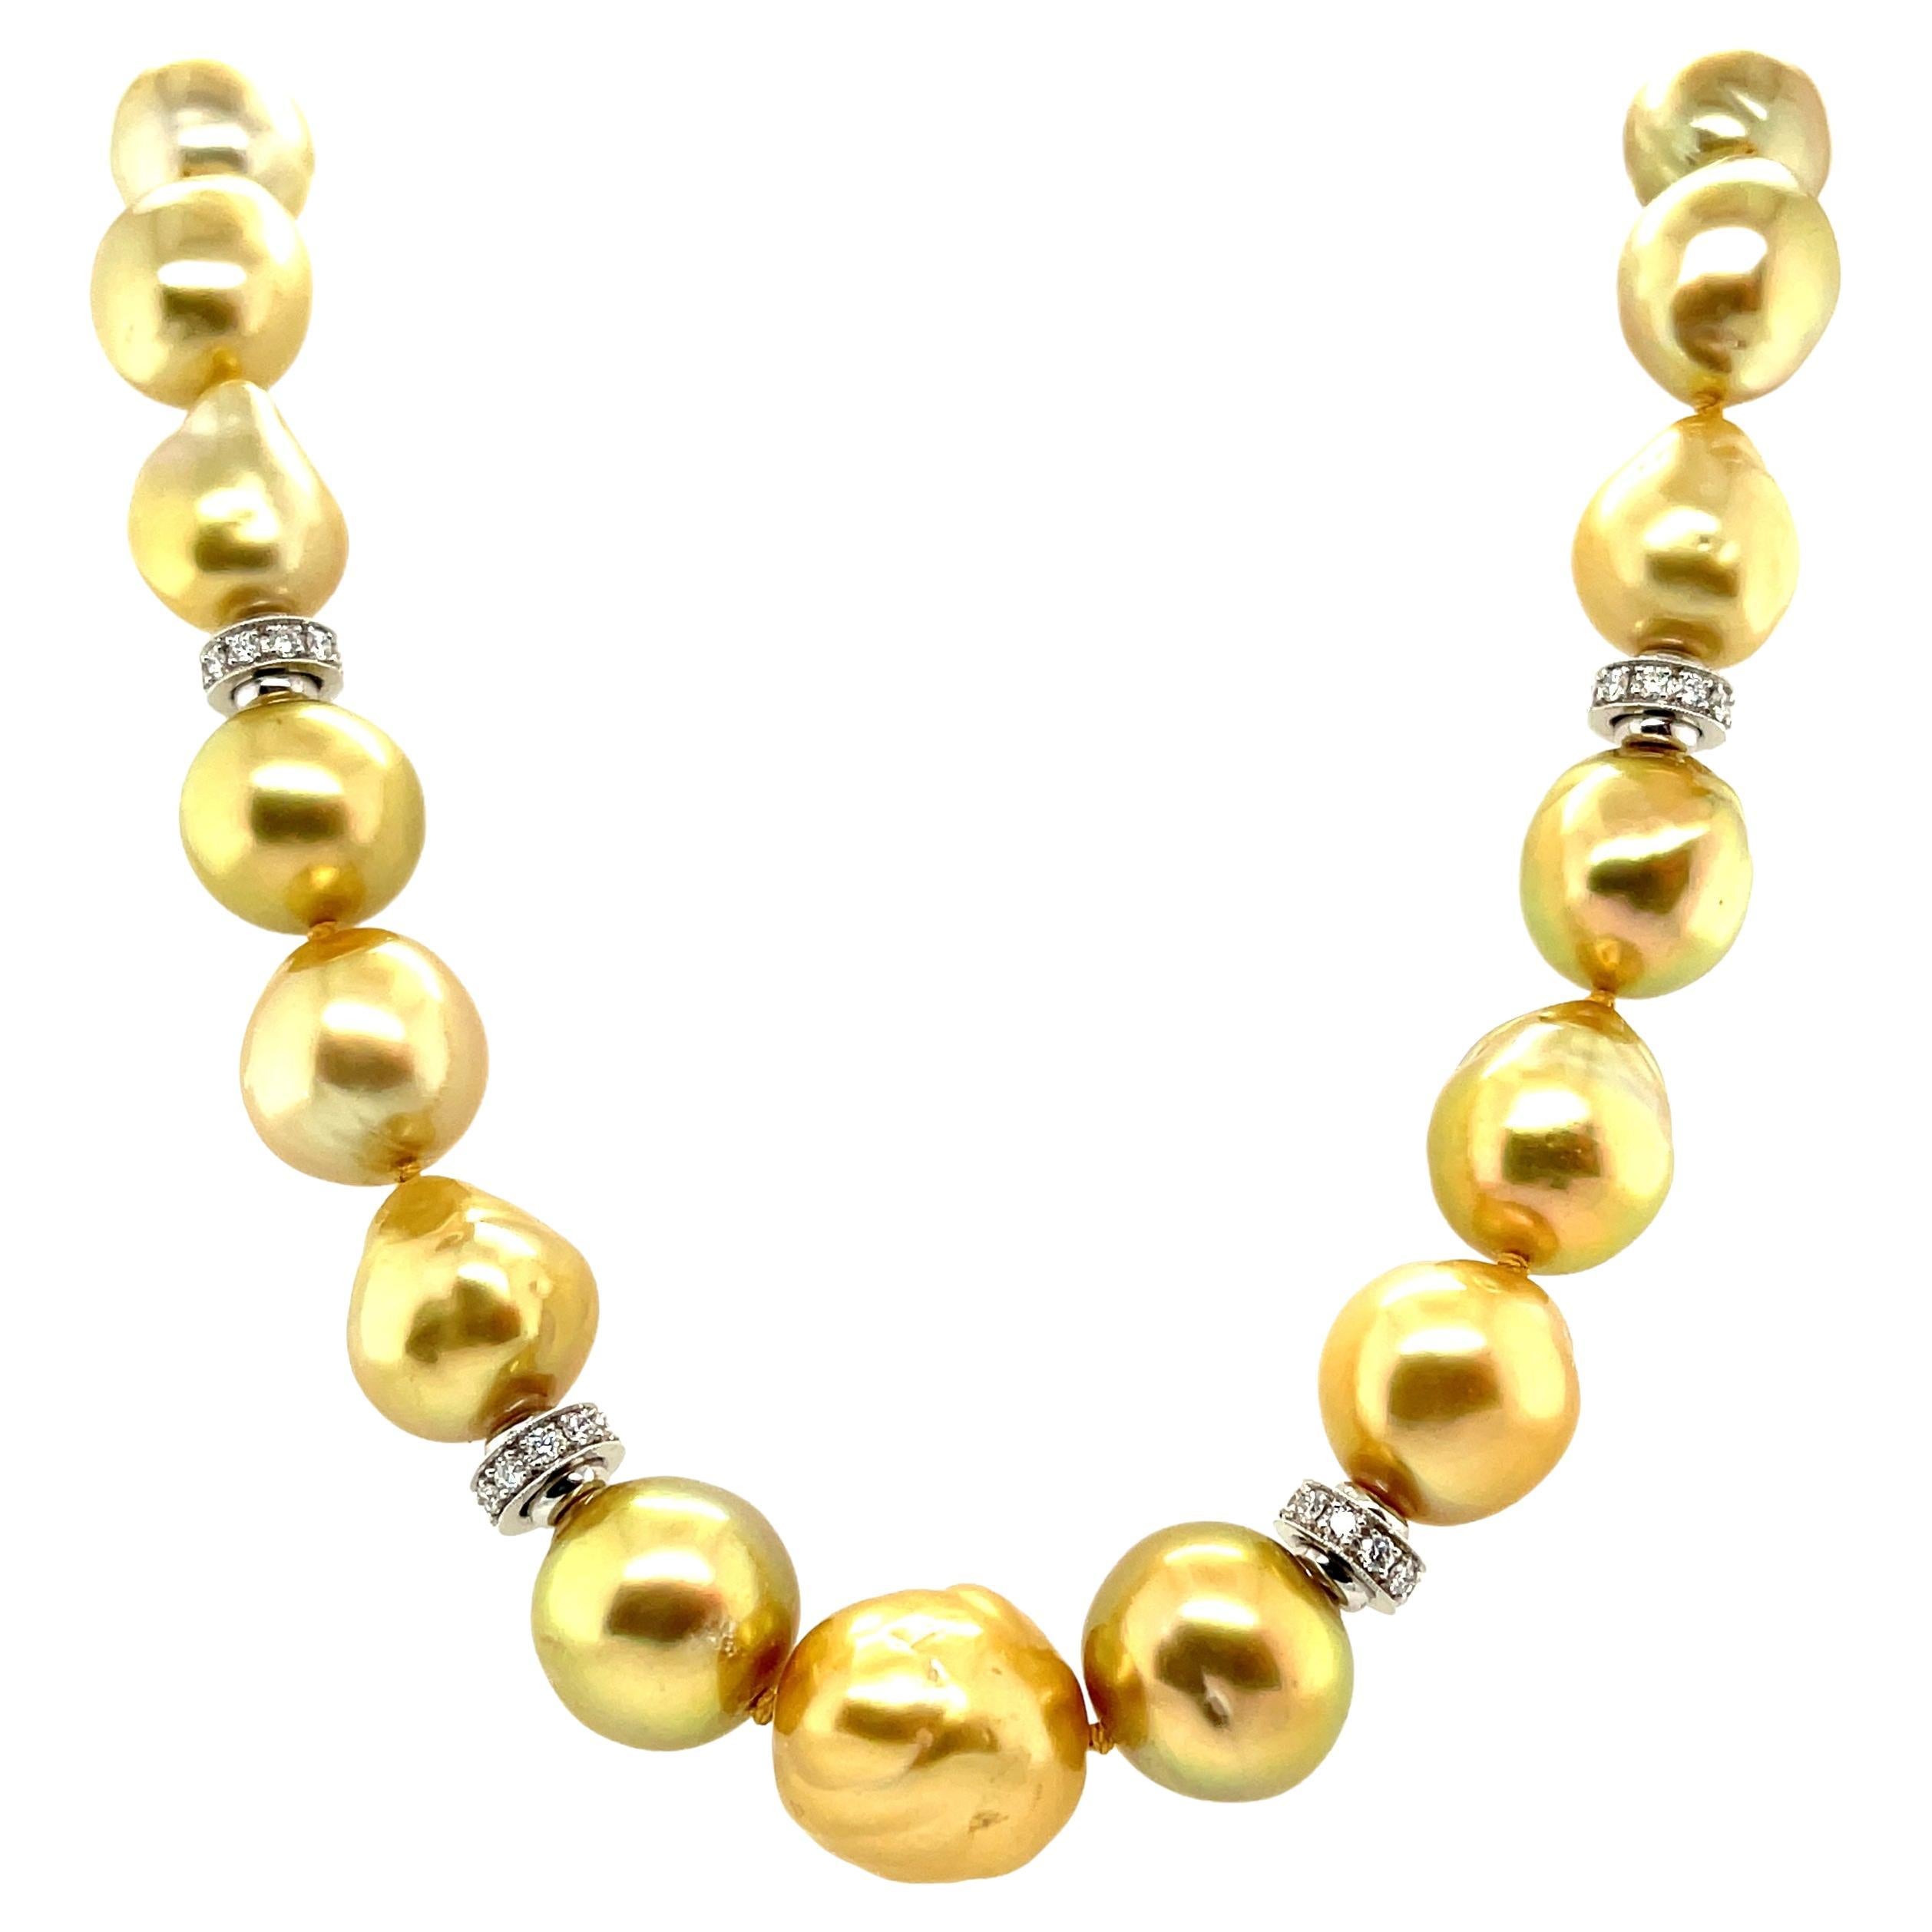 Golden South Seas Pearl Necklace with Diamond and Gold Accents, 21 Inches For Sale